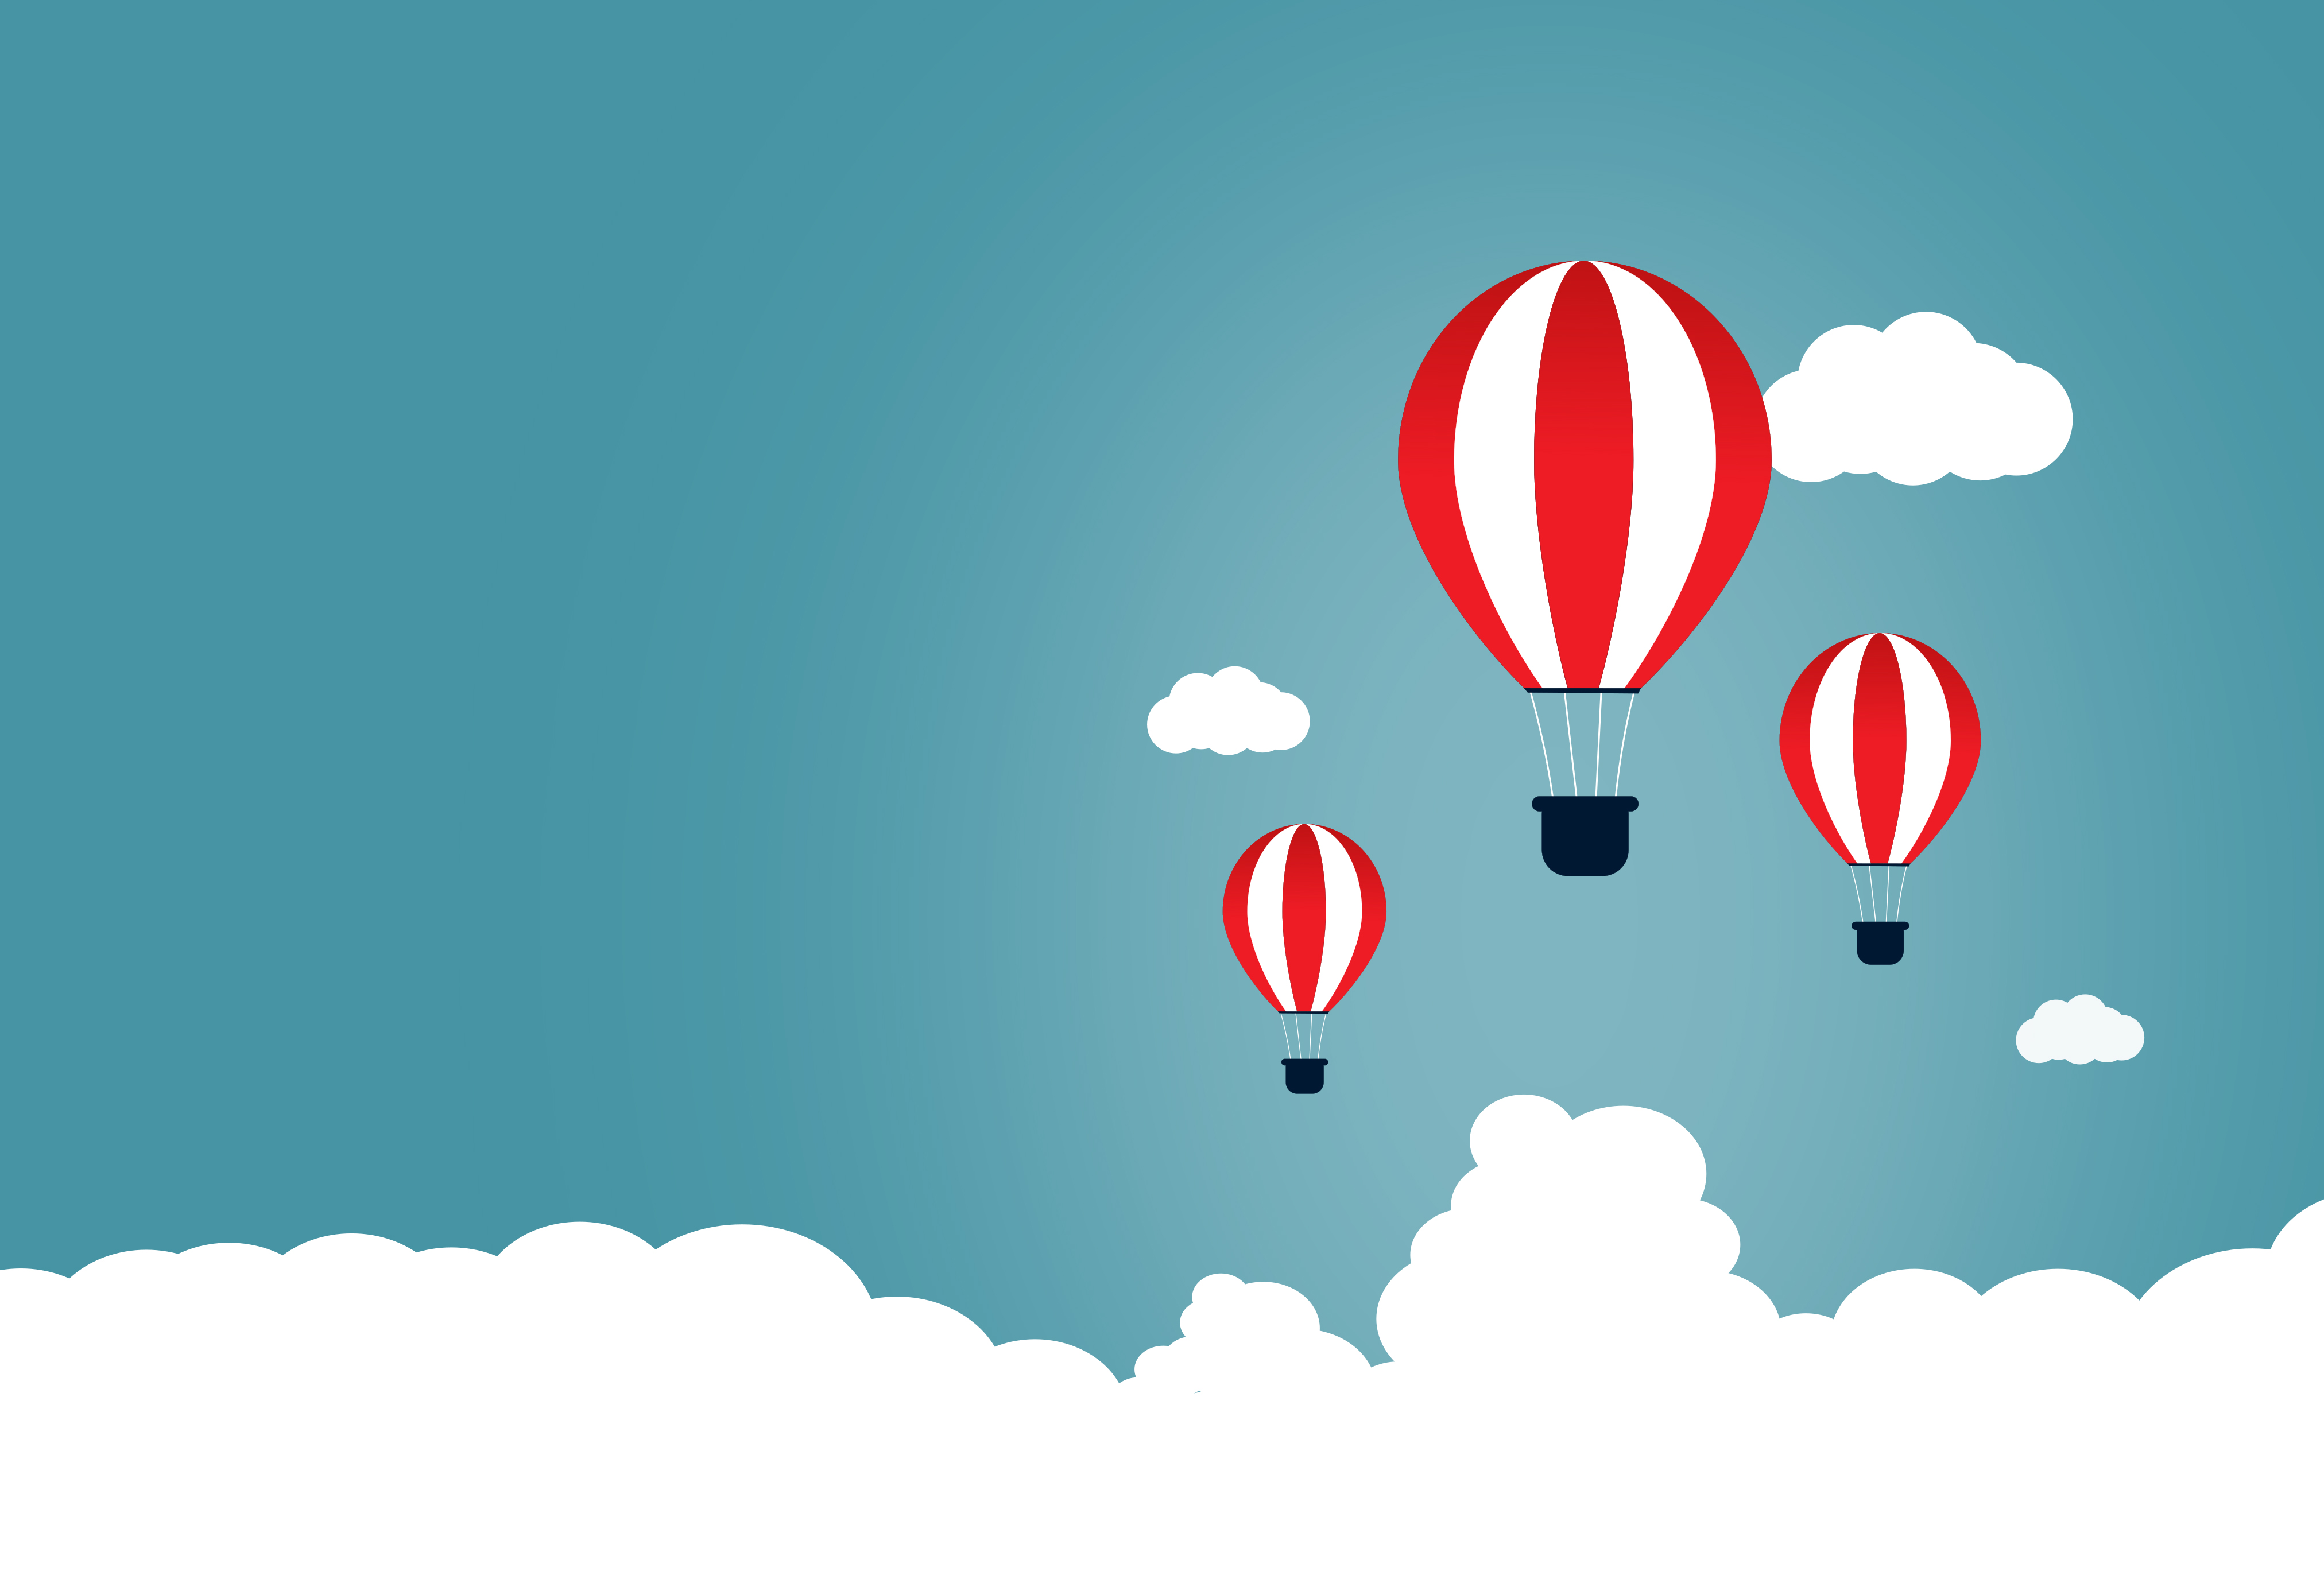 Creative Start and Start-Up Concept with Hot Air Balloons, Achievement, Orange, Rising, Retro, HQ Photo